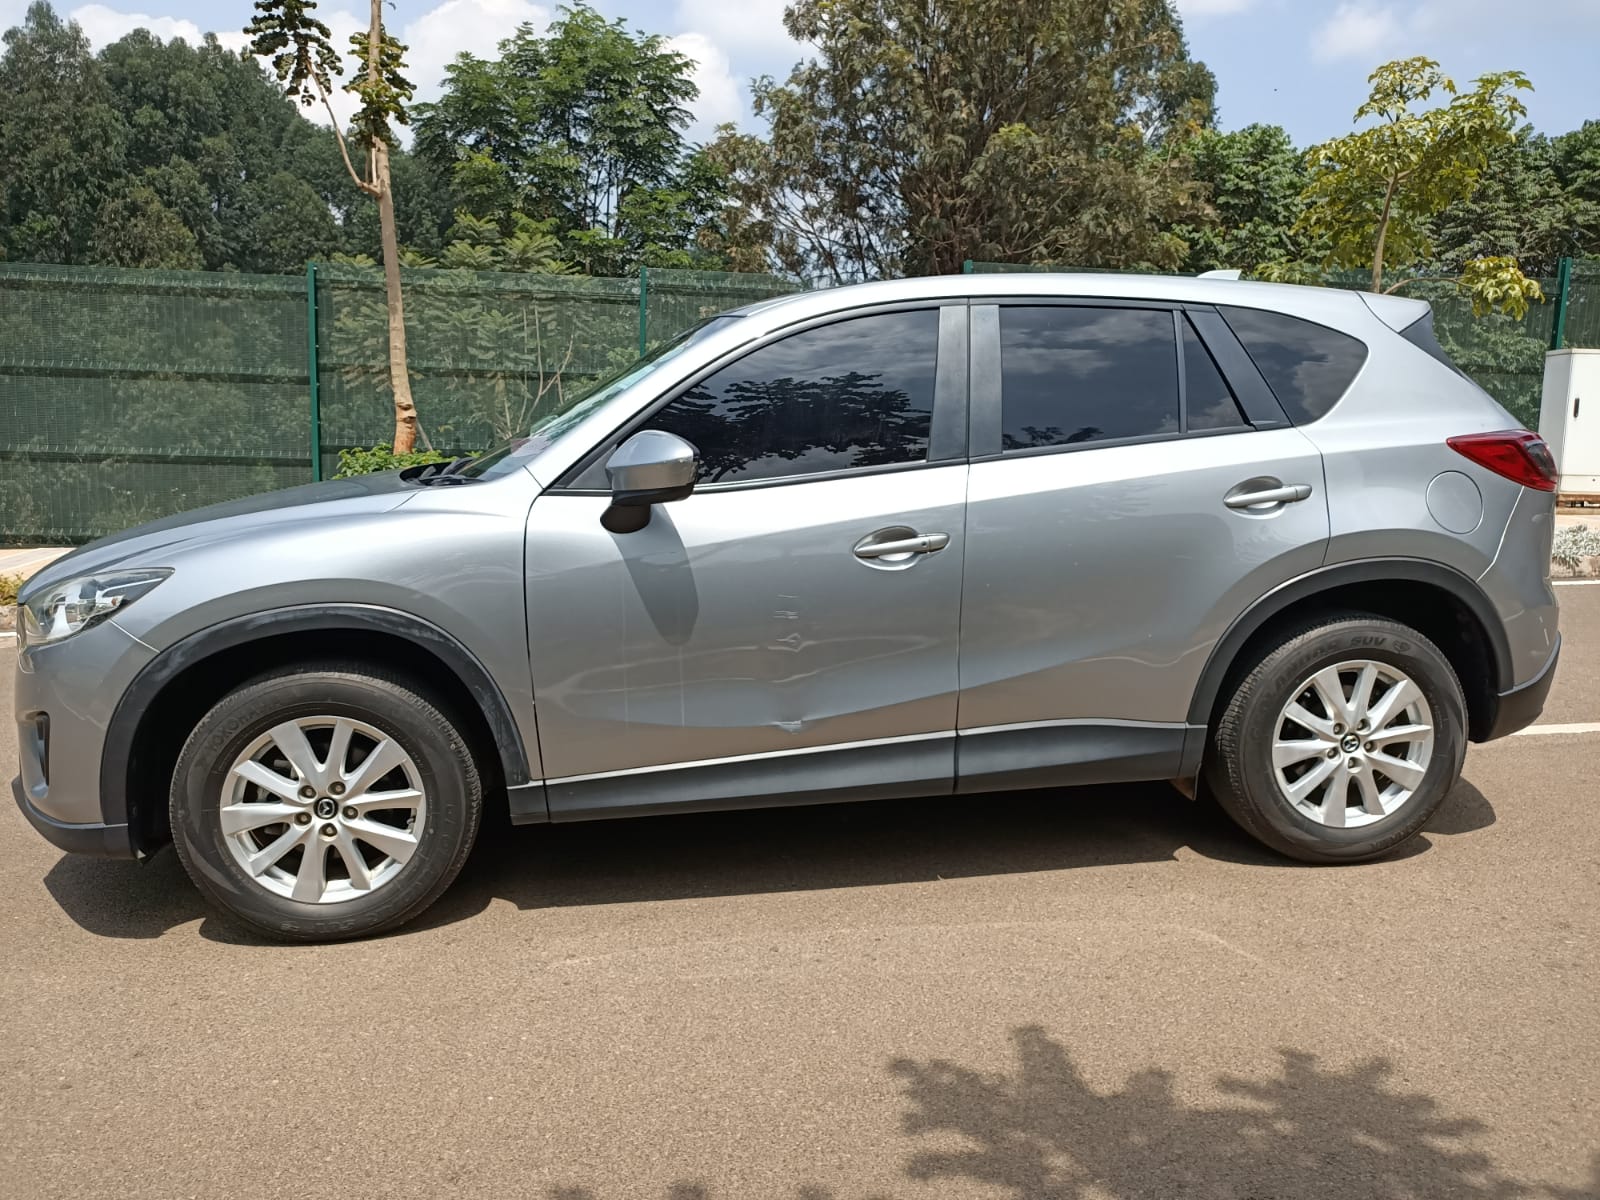 Mazda CX-5 2013 Pay 20% 80% in 60 Monthly Installments New